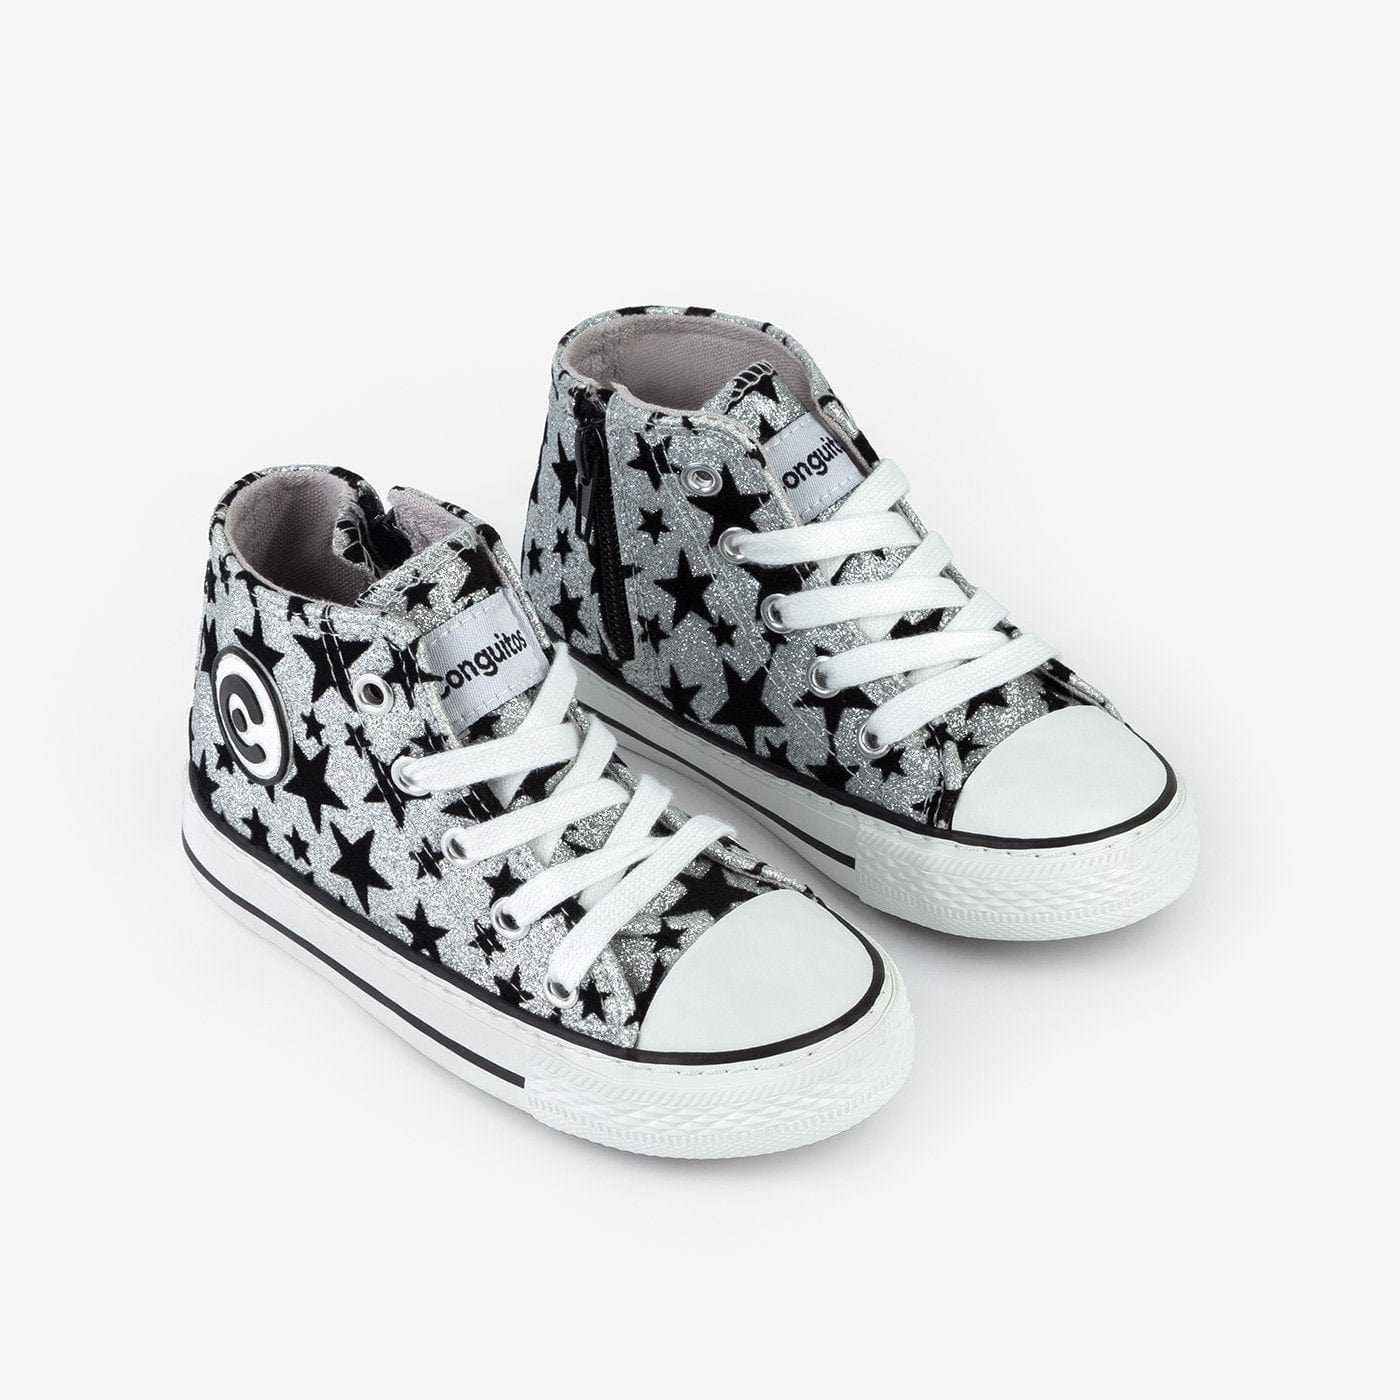 CONGUITOS Shoes Unisex Silver Glitter Stars Boots